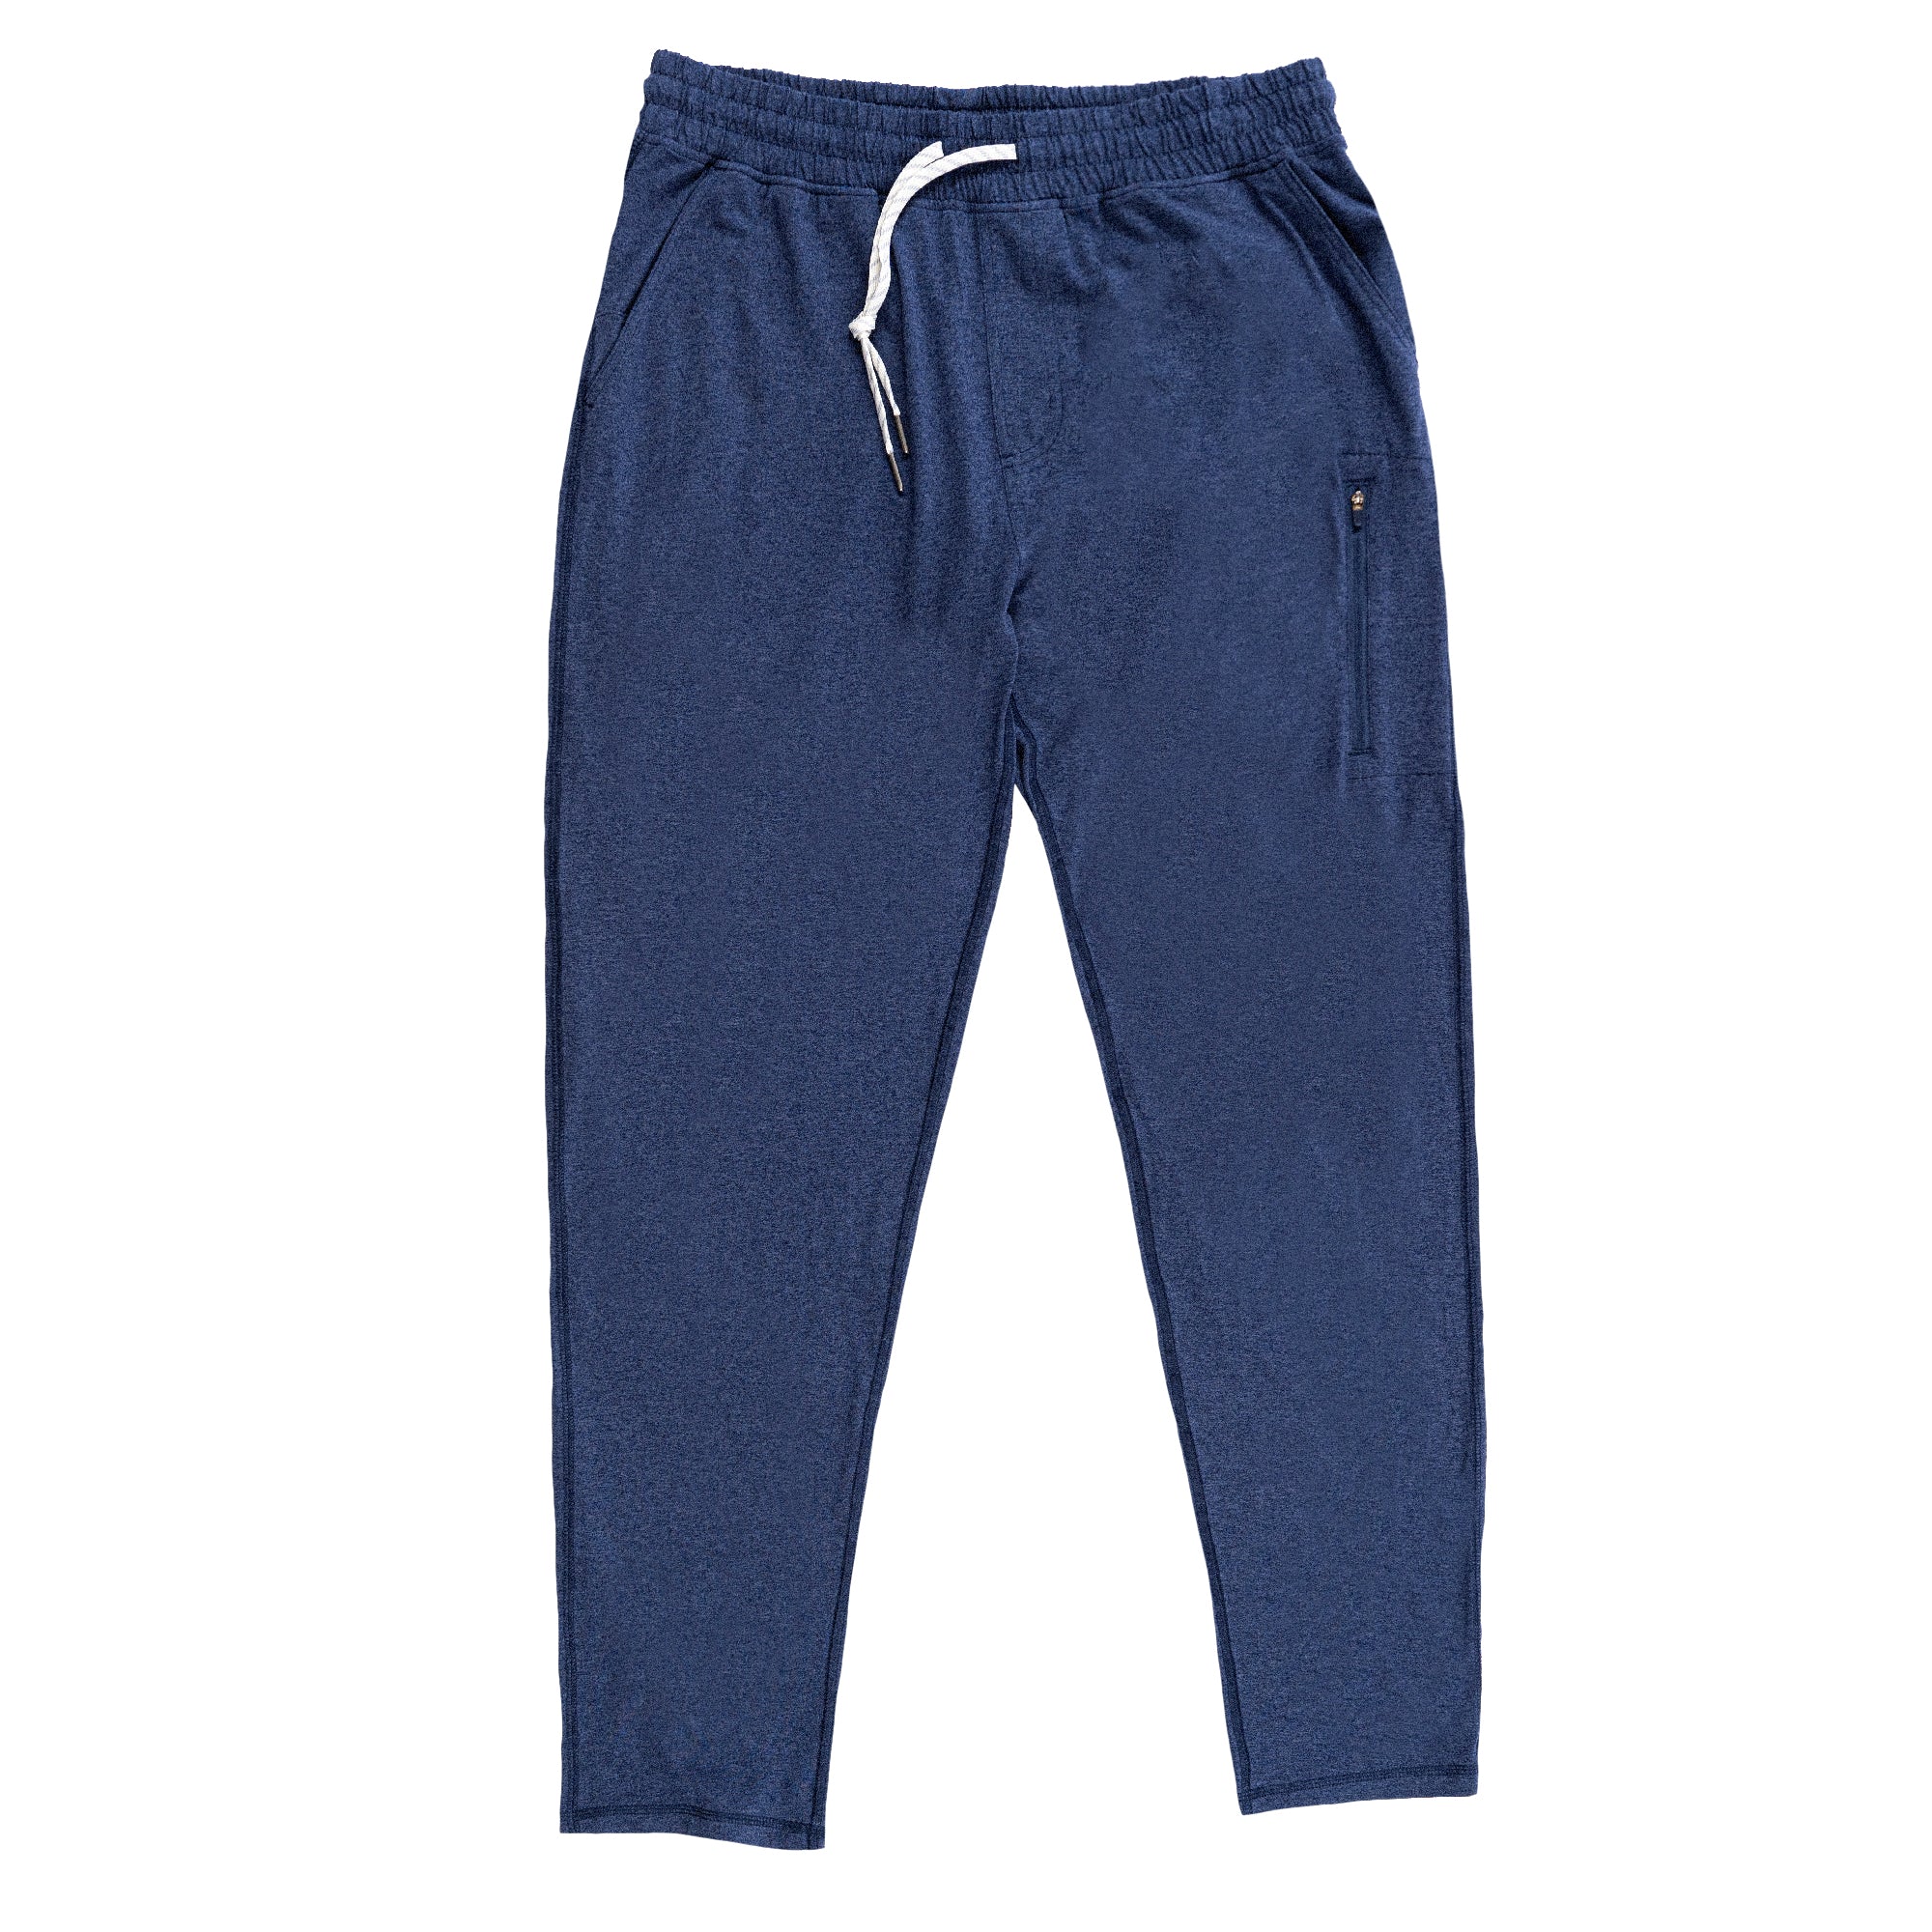 Buy heather-ink-blue MENS DAWN TO DUSK JOGGER